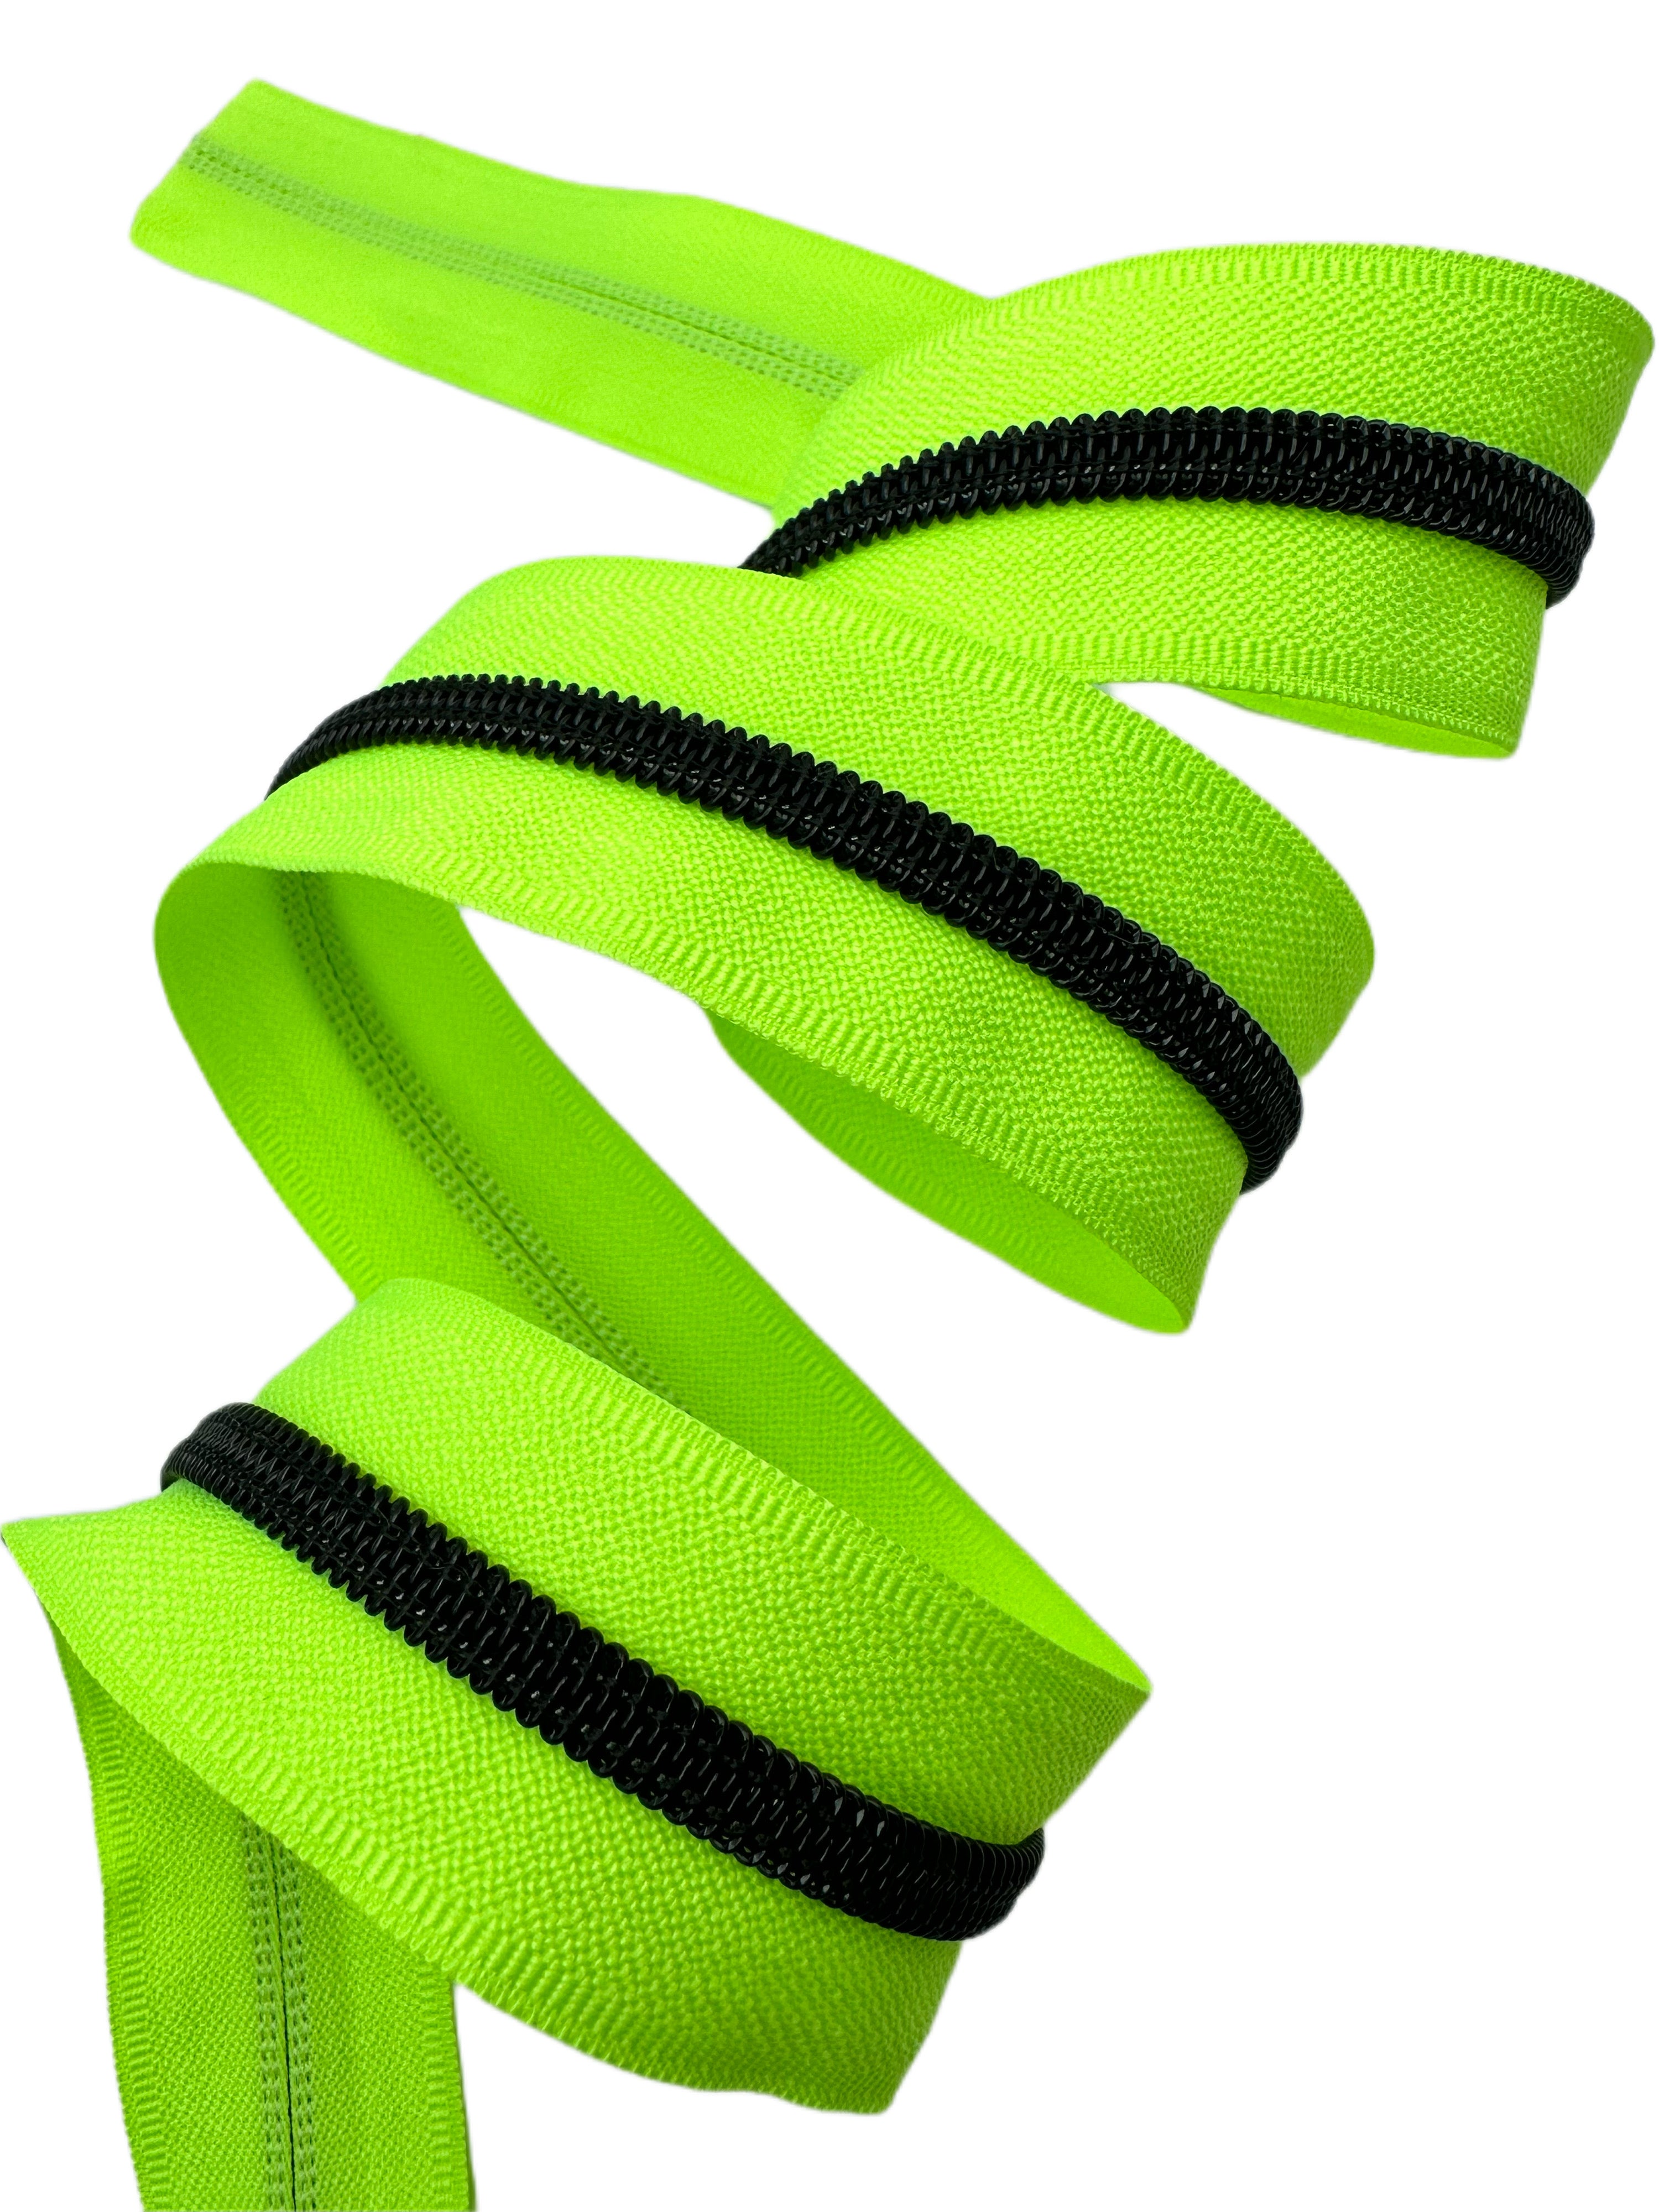 Highlighter Yellow Tape with Black Teeth Zipper Tape